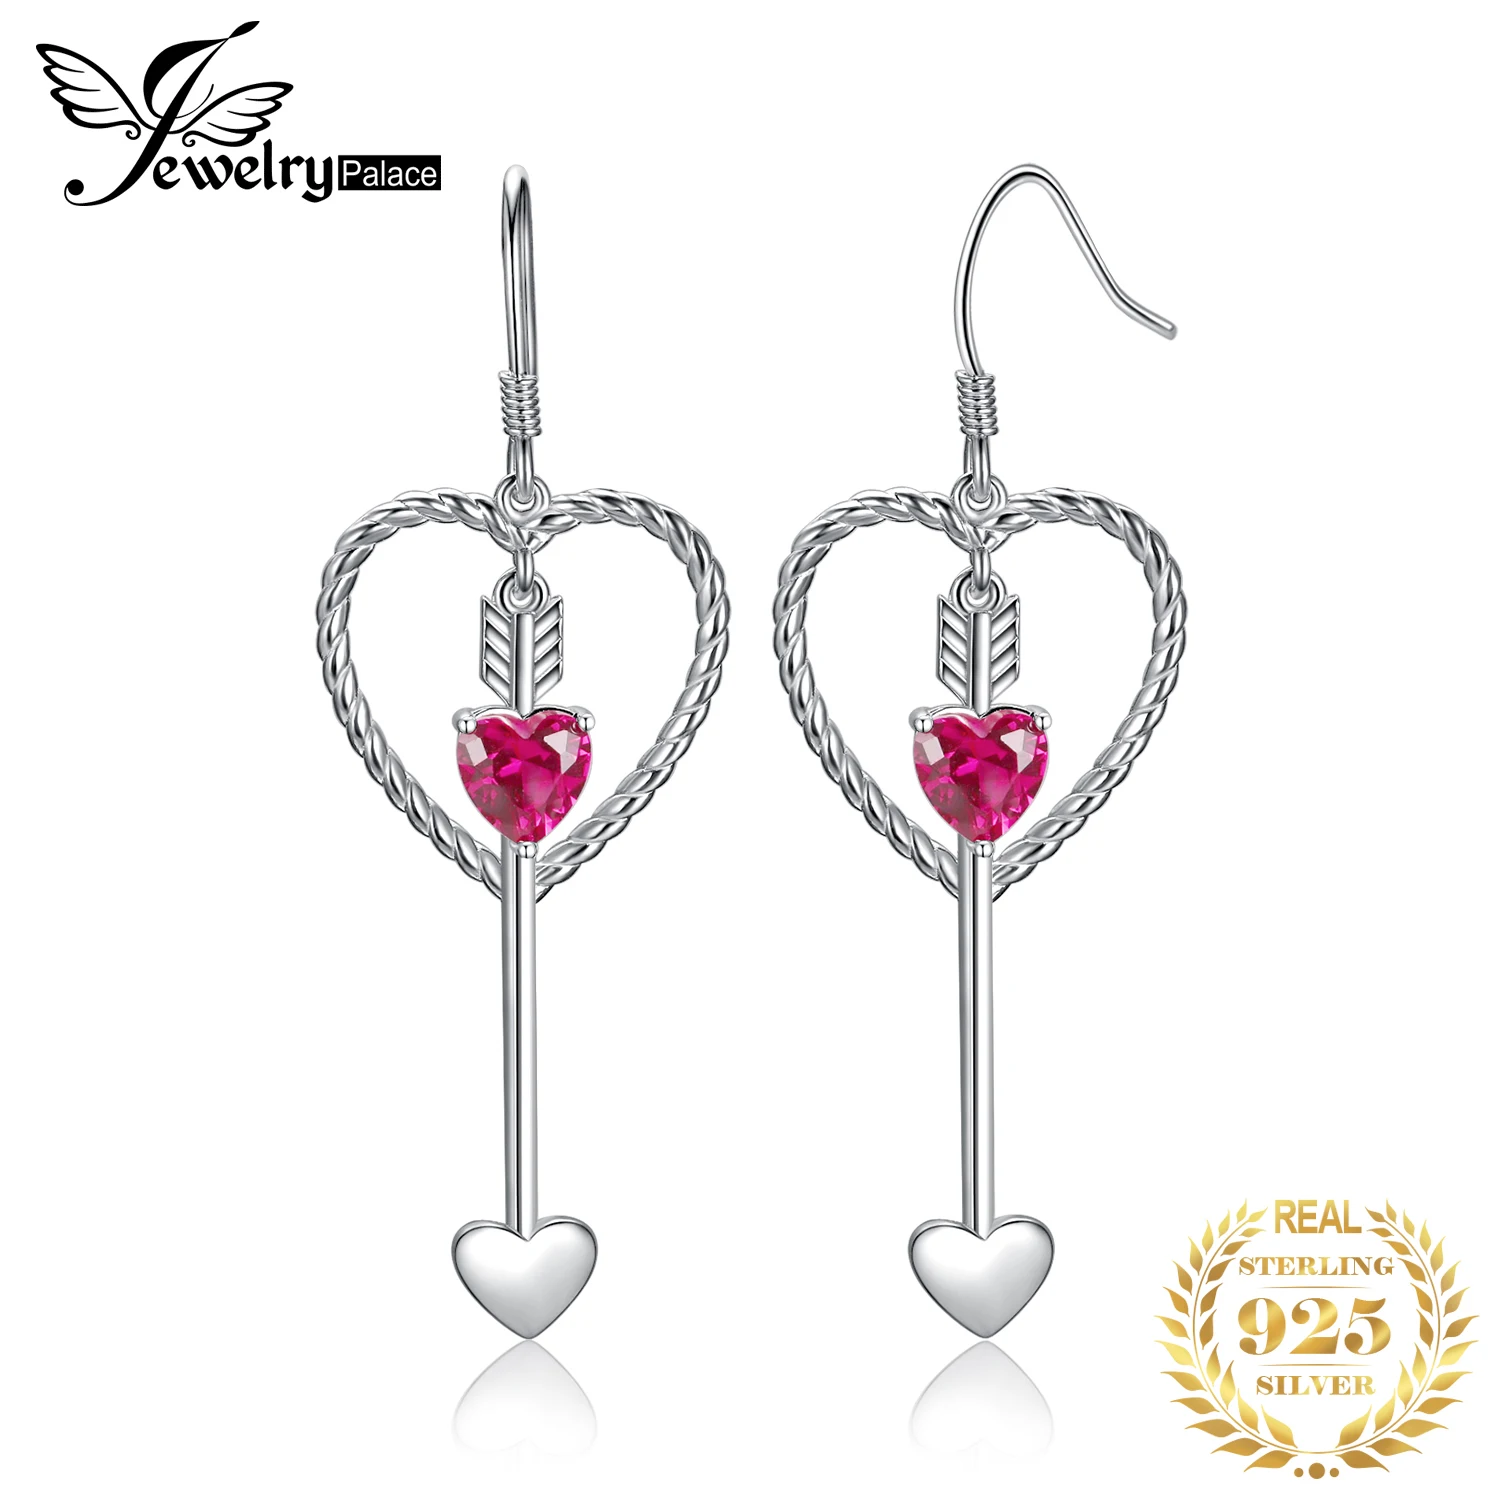 

JewelryPalace New Arrival Love Heart Cupid Arrow 1.8ct Ruby Color Cubic Zirconia 925 Sterling Silver Drop Earrings for Woman